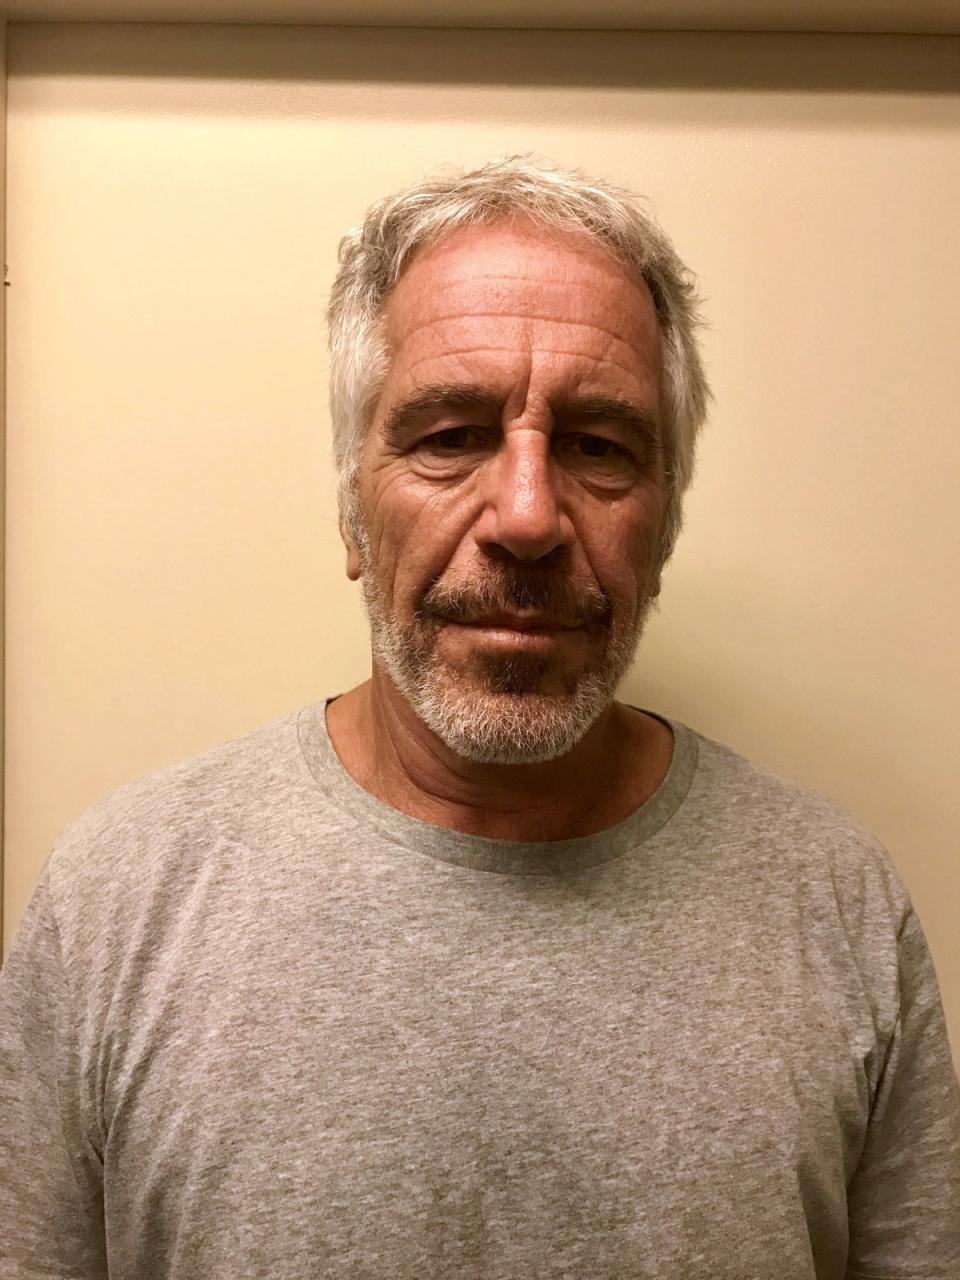 Mr Trump and Epstein reportedly fell out in the 1990s (EPA)